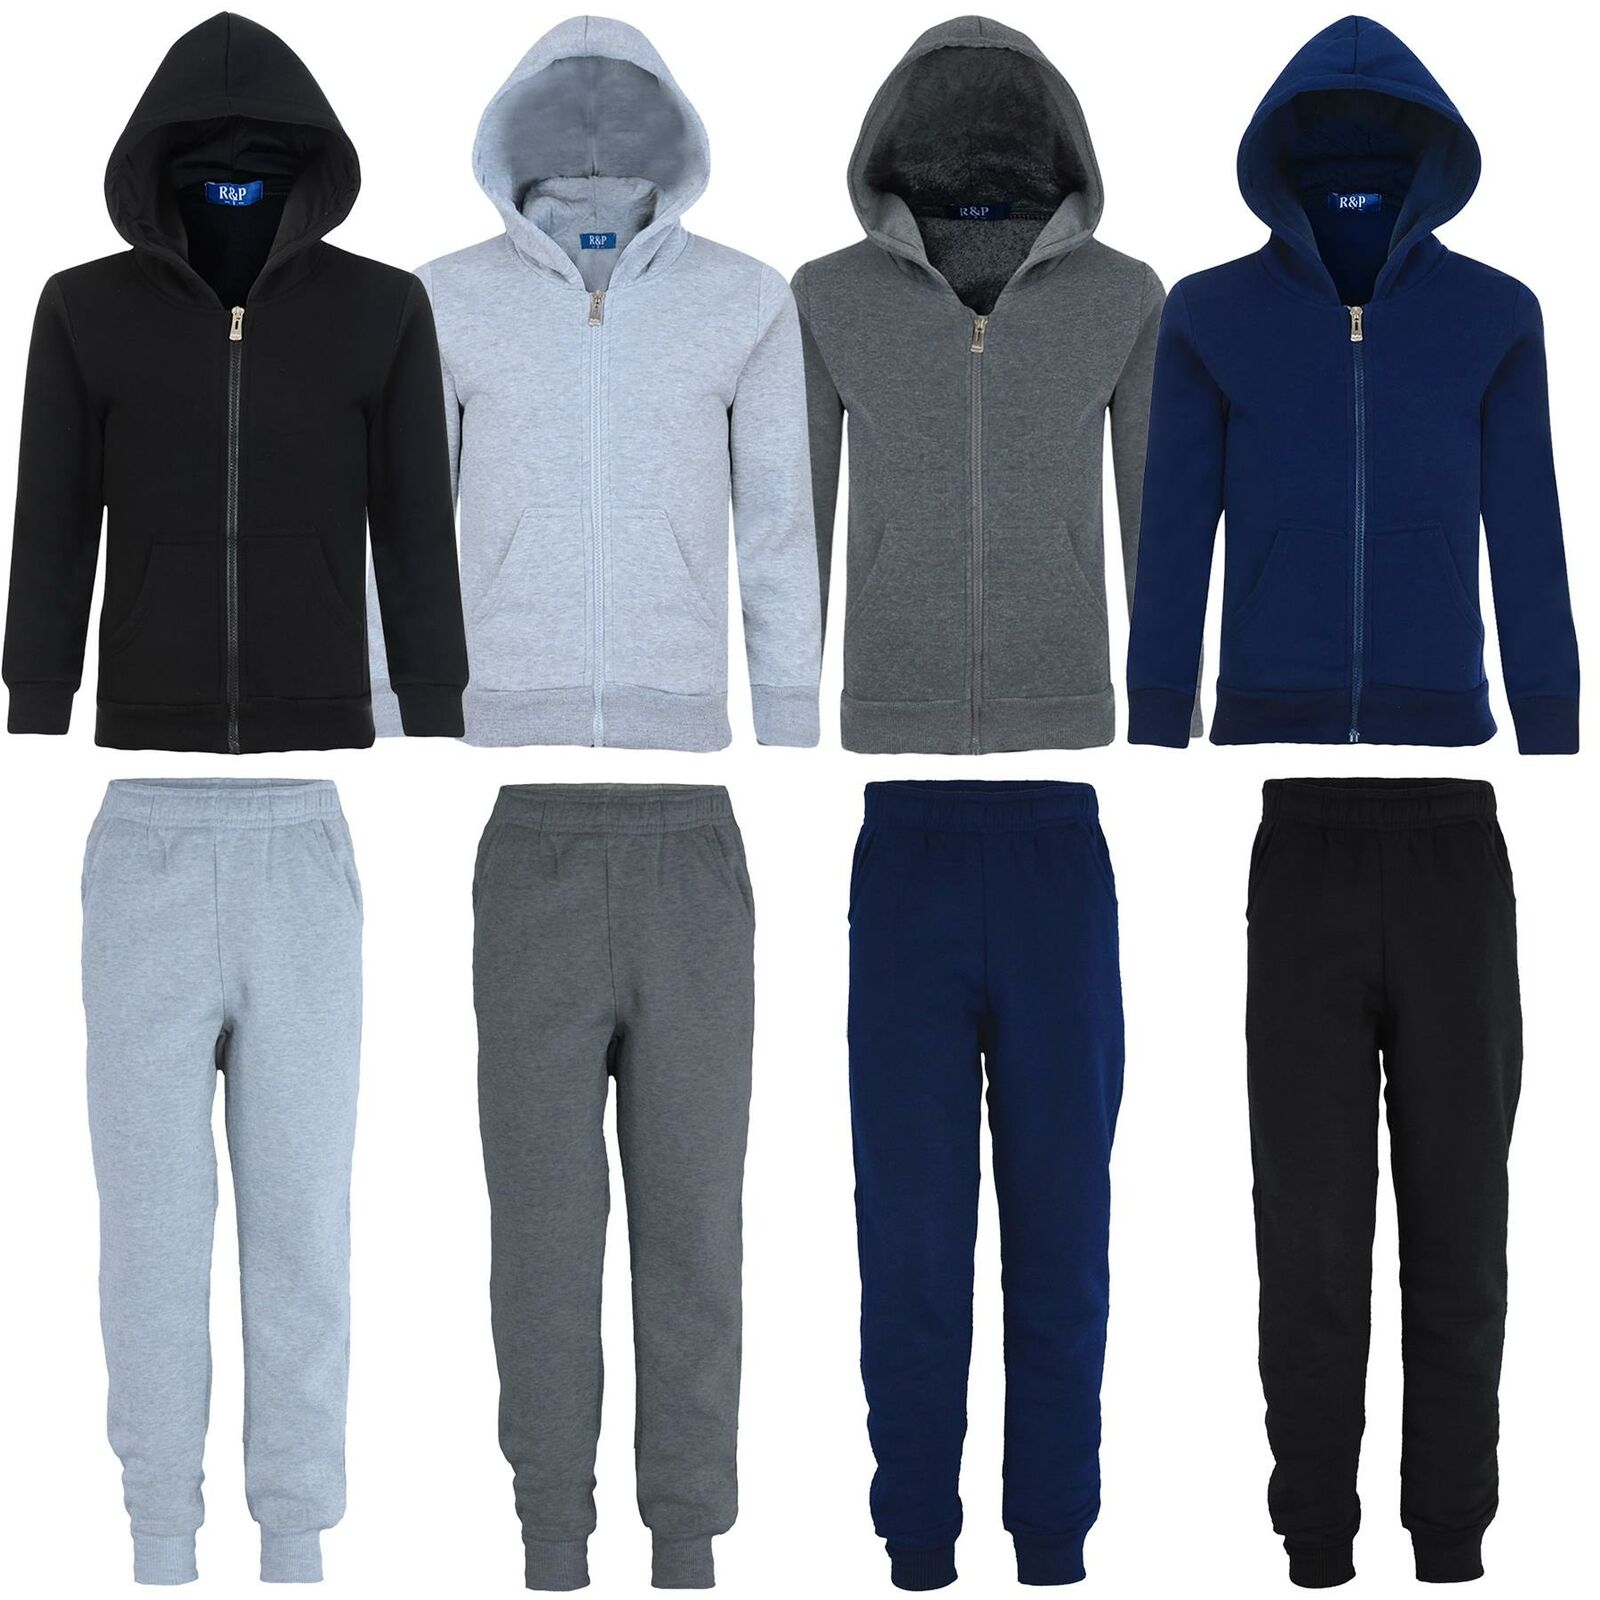 Max 84% OFF Kids Plain Fleece Tracksuit Jogging Hooded San Antonio Mall Trousers Si Jumper or